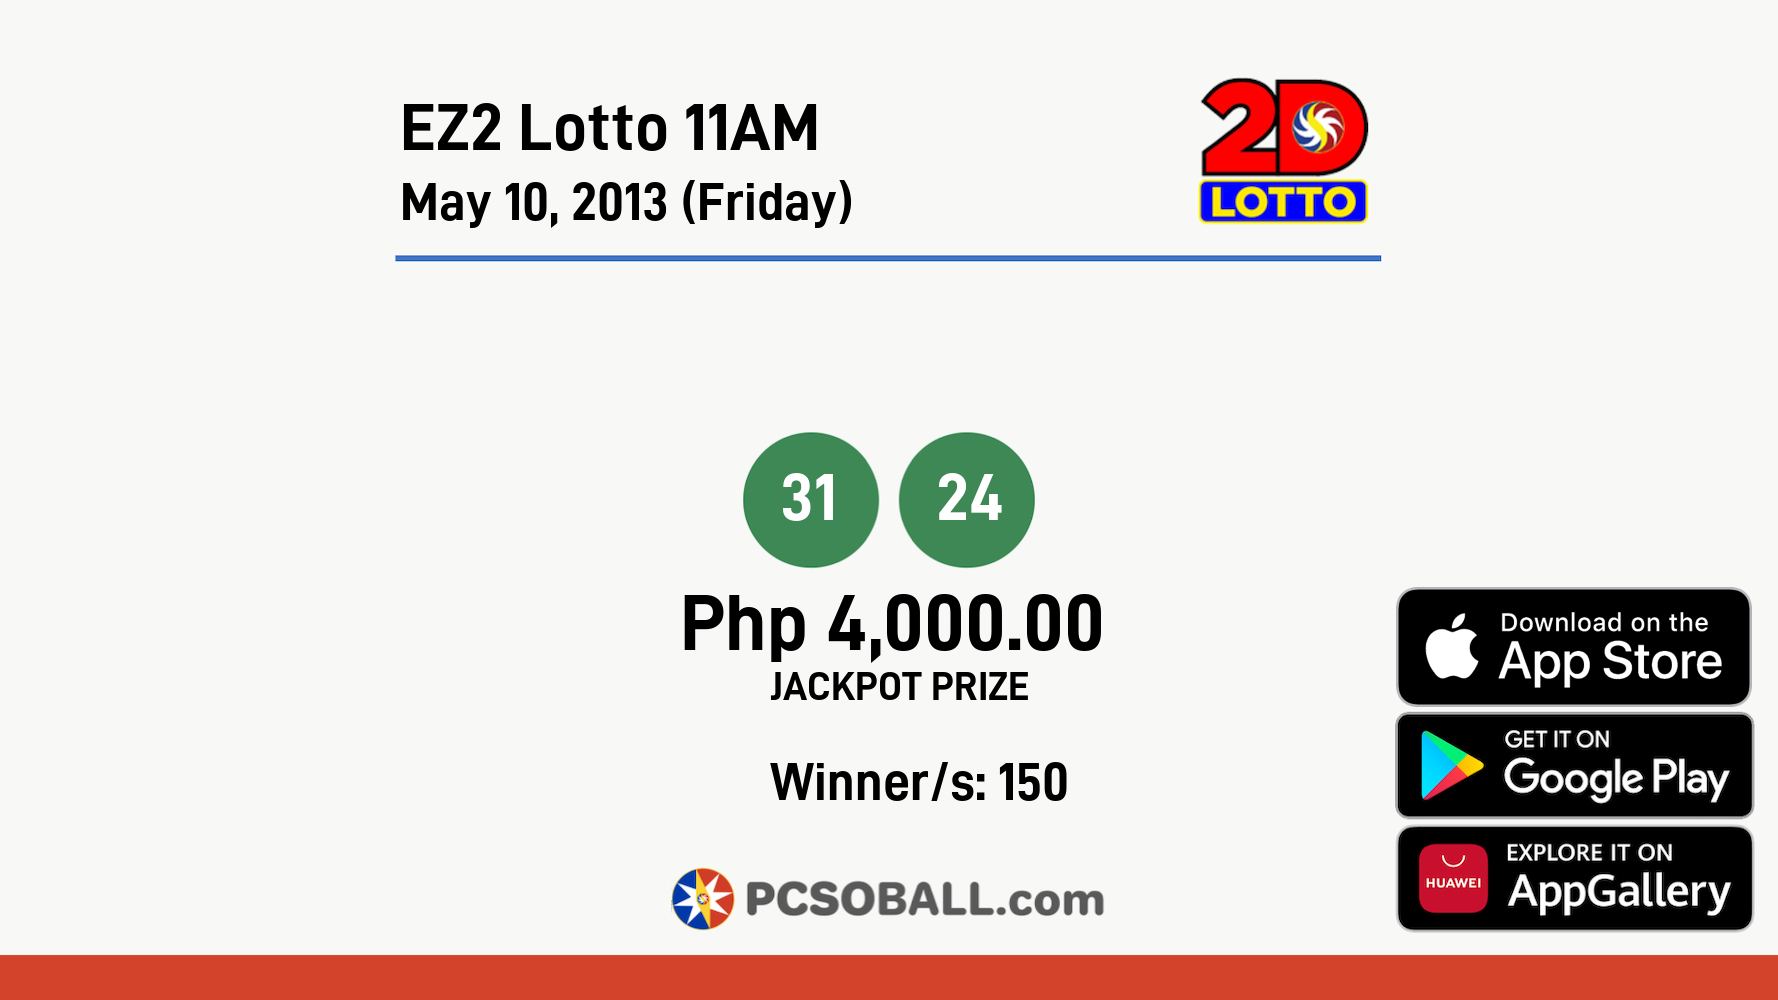 EZ2 Lotto 11AM May 10, 2013 (Friday) Result